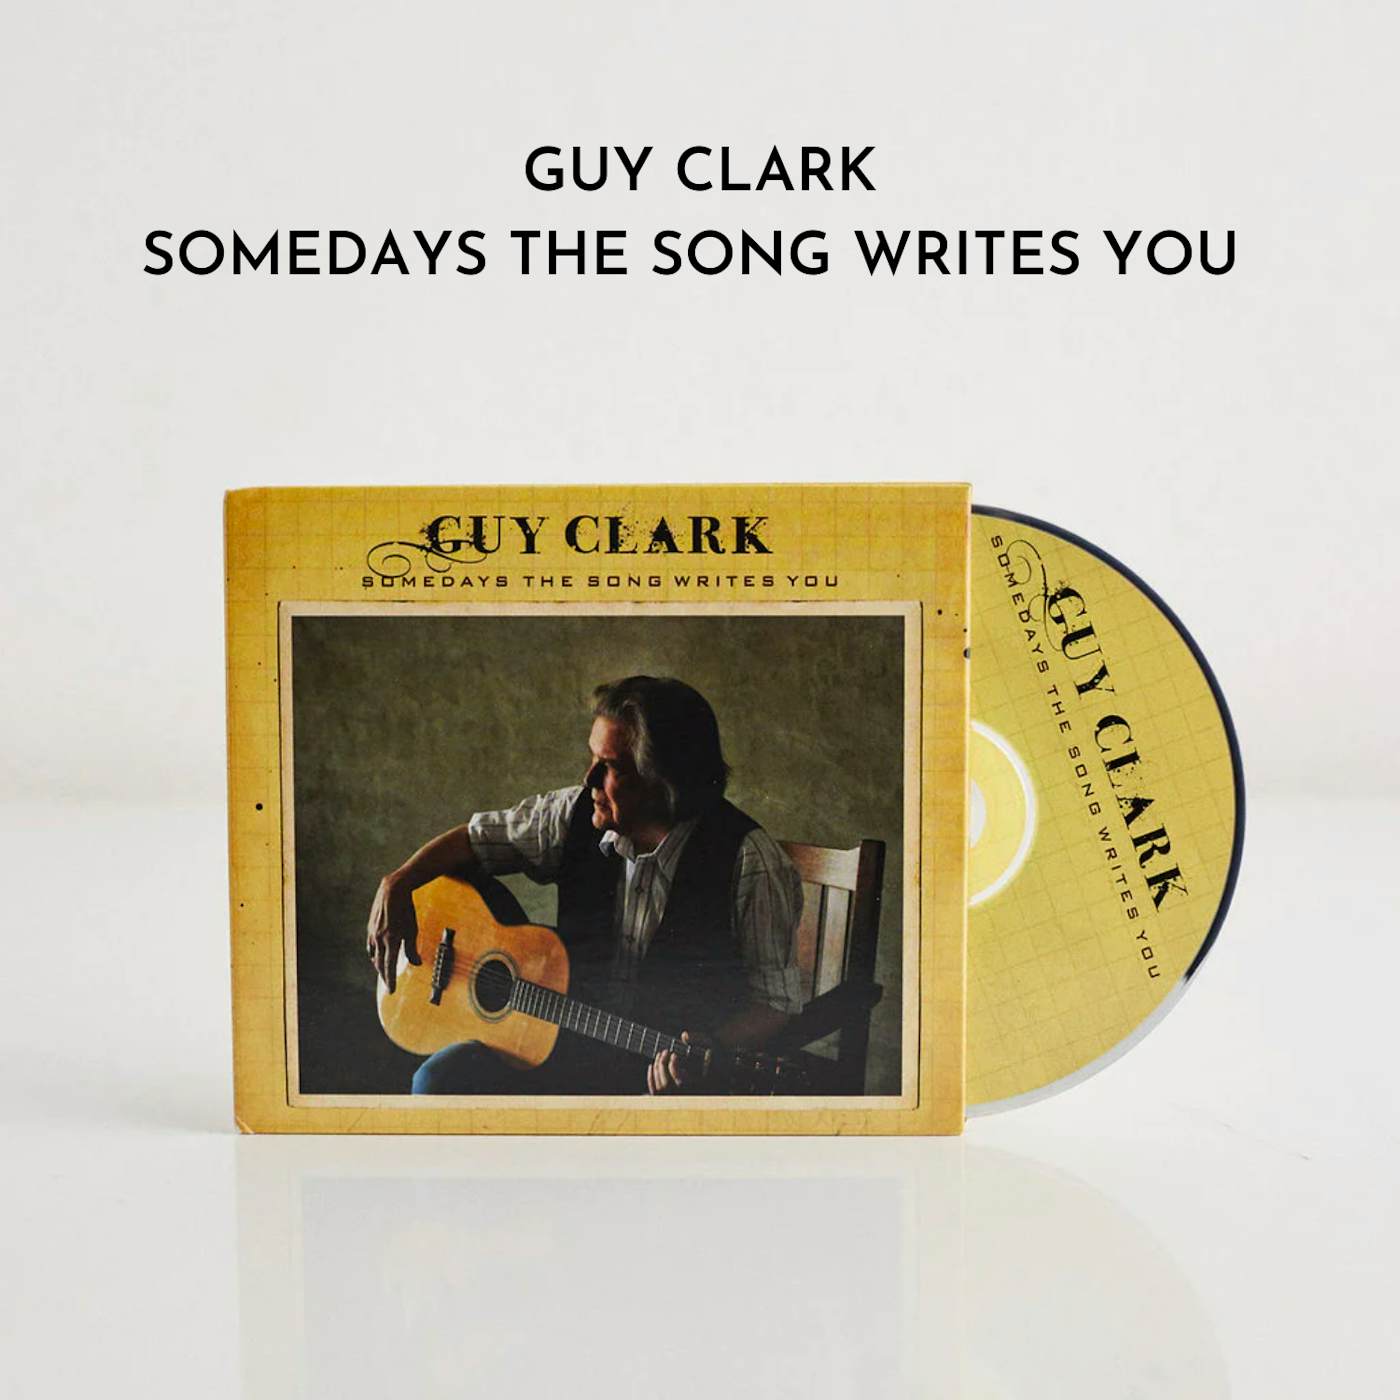 Guy Clark Somedays The Song Writes You (CD)